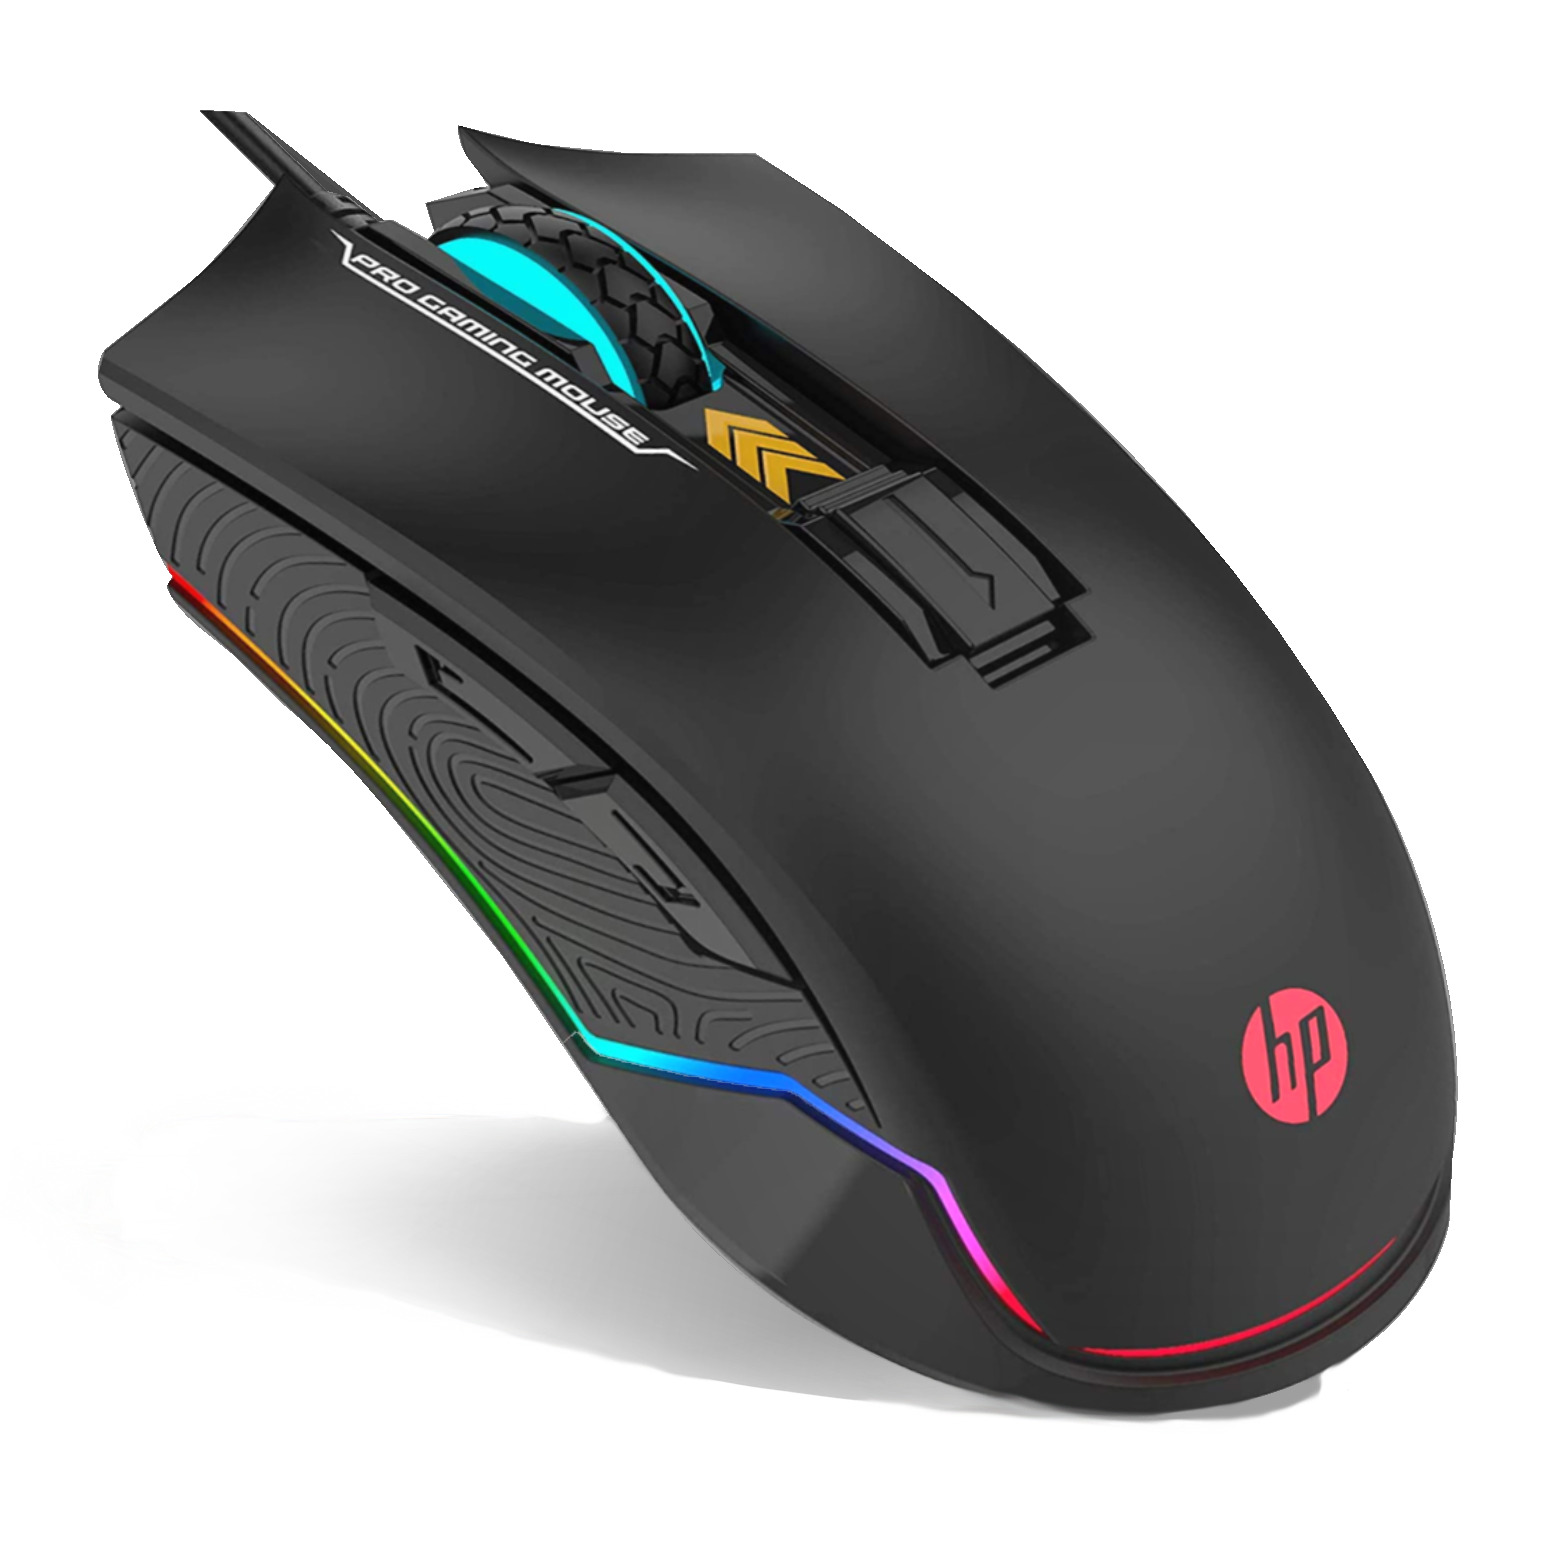 HP Wired Gaming Mouse LED RGB Backlit USB Wired Mouse for Gaming